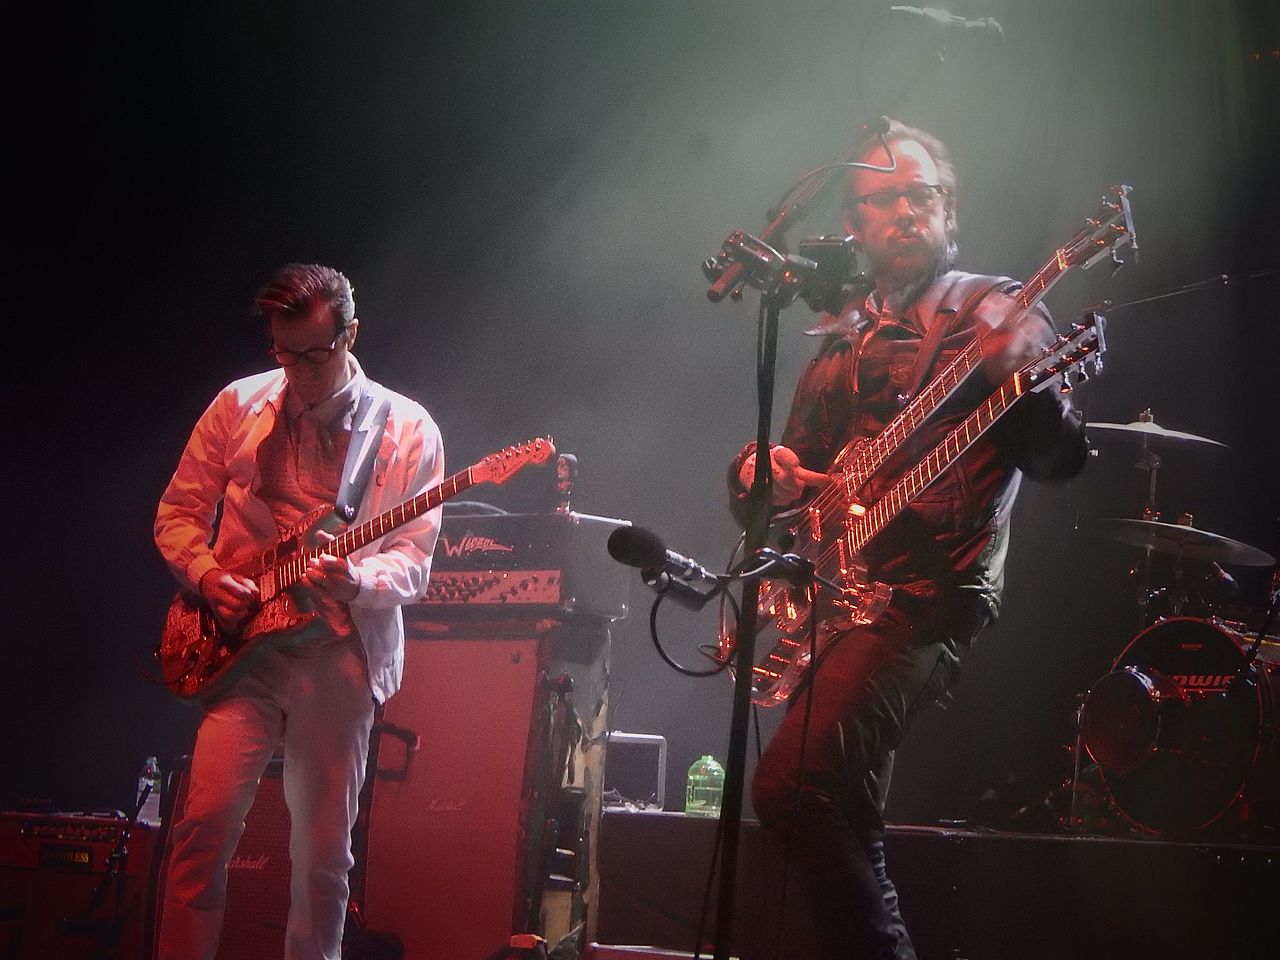 Presale Codes for Weezer Indie Rock Roadtrip Tour with Modest Mouse